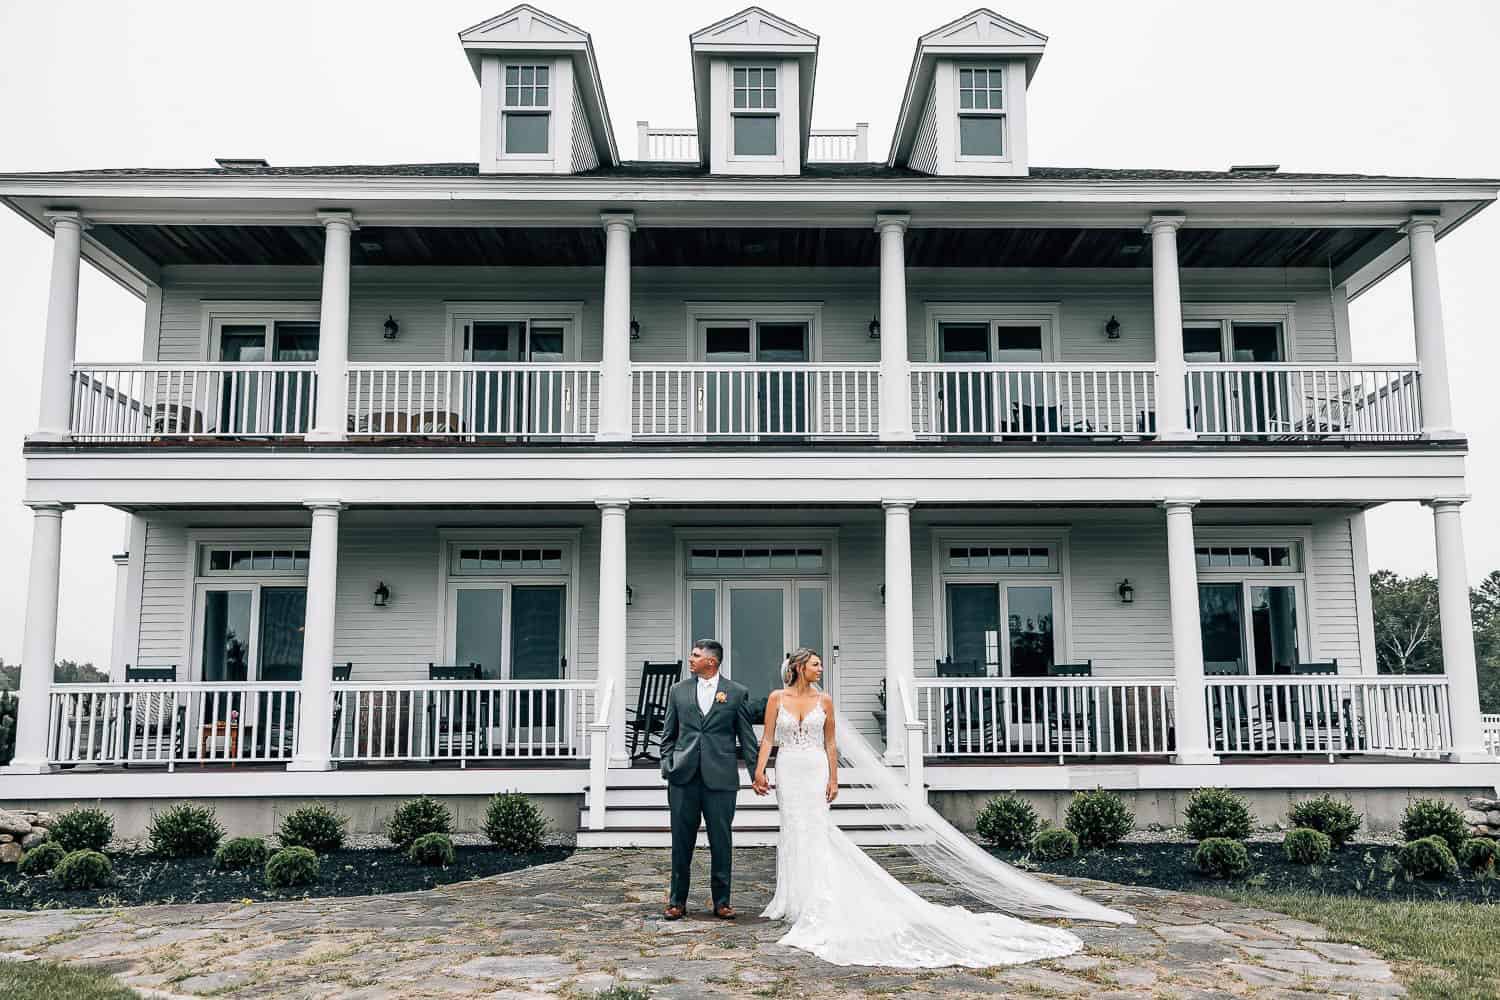 A bride and groom holding hands in front of a large white house with double balconies, surrounded by a grassy lawn.